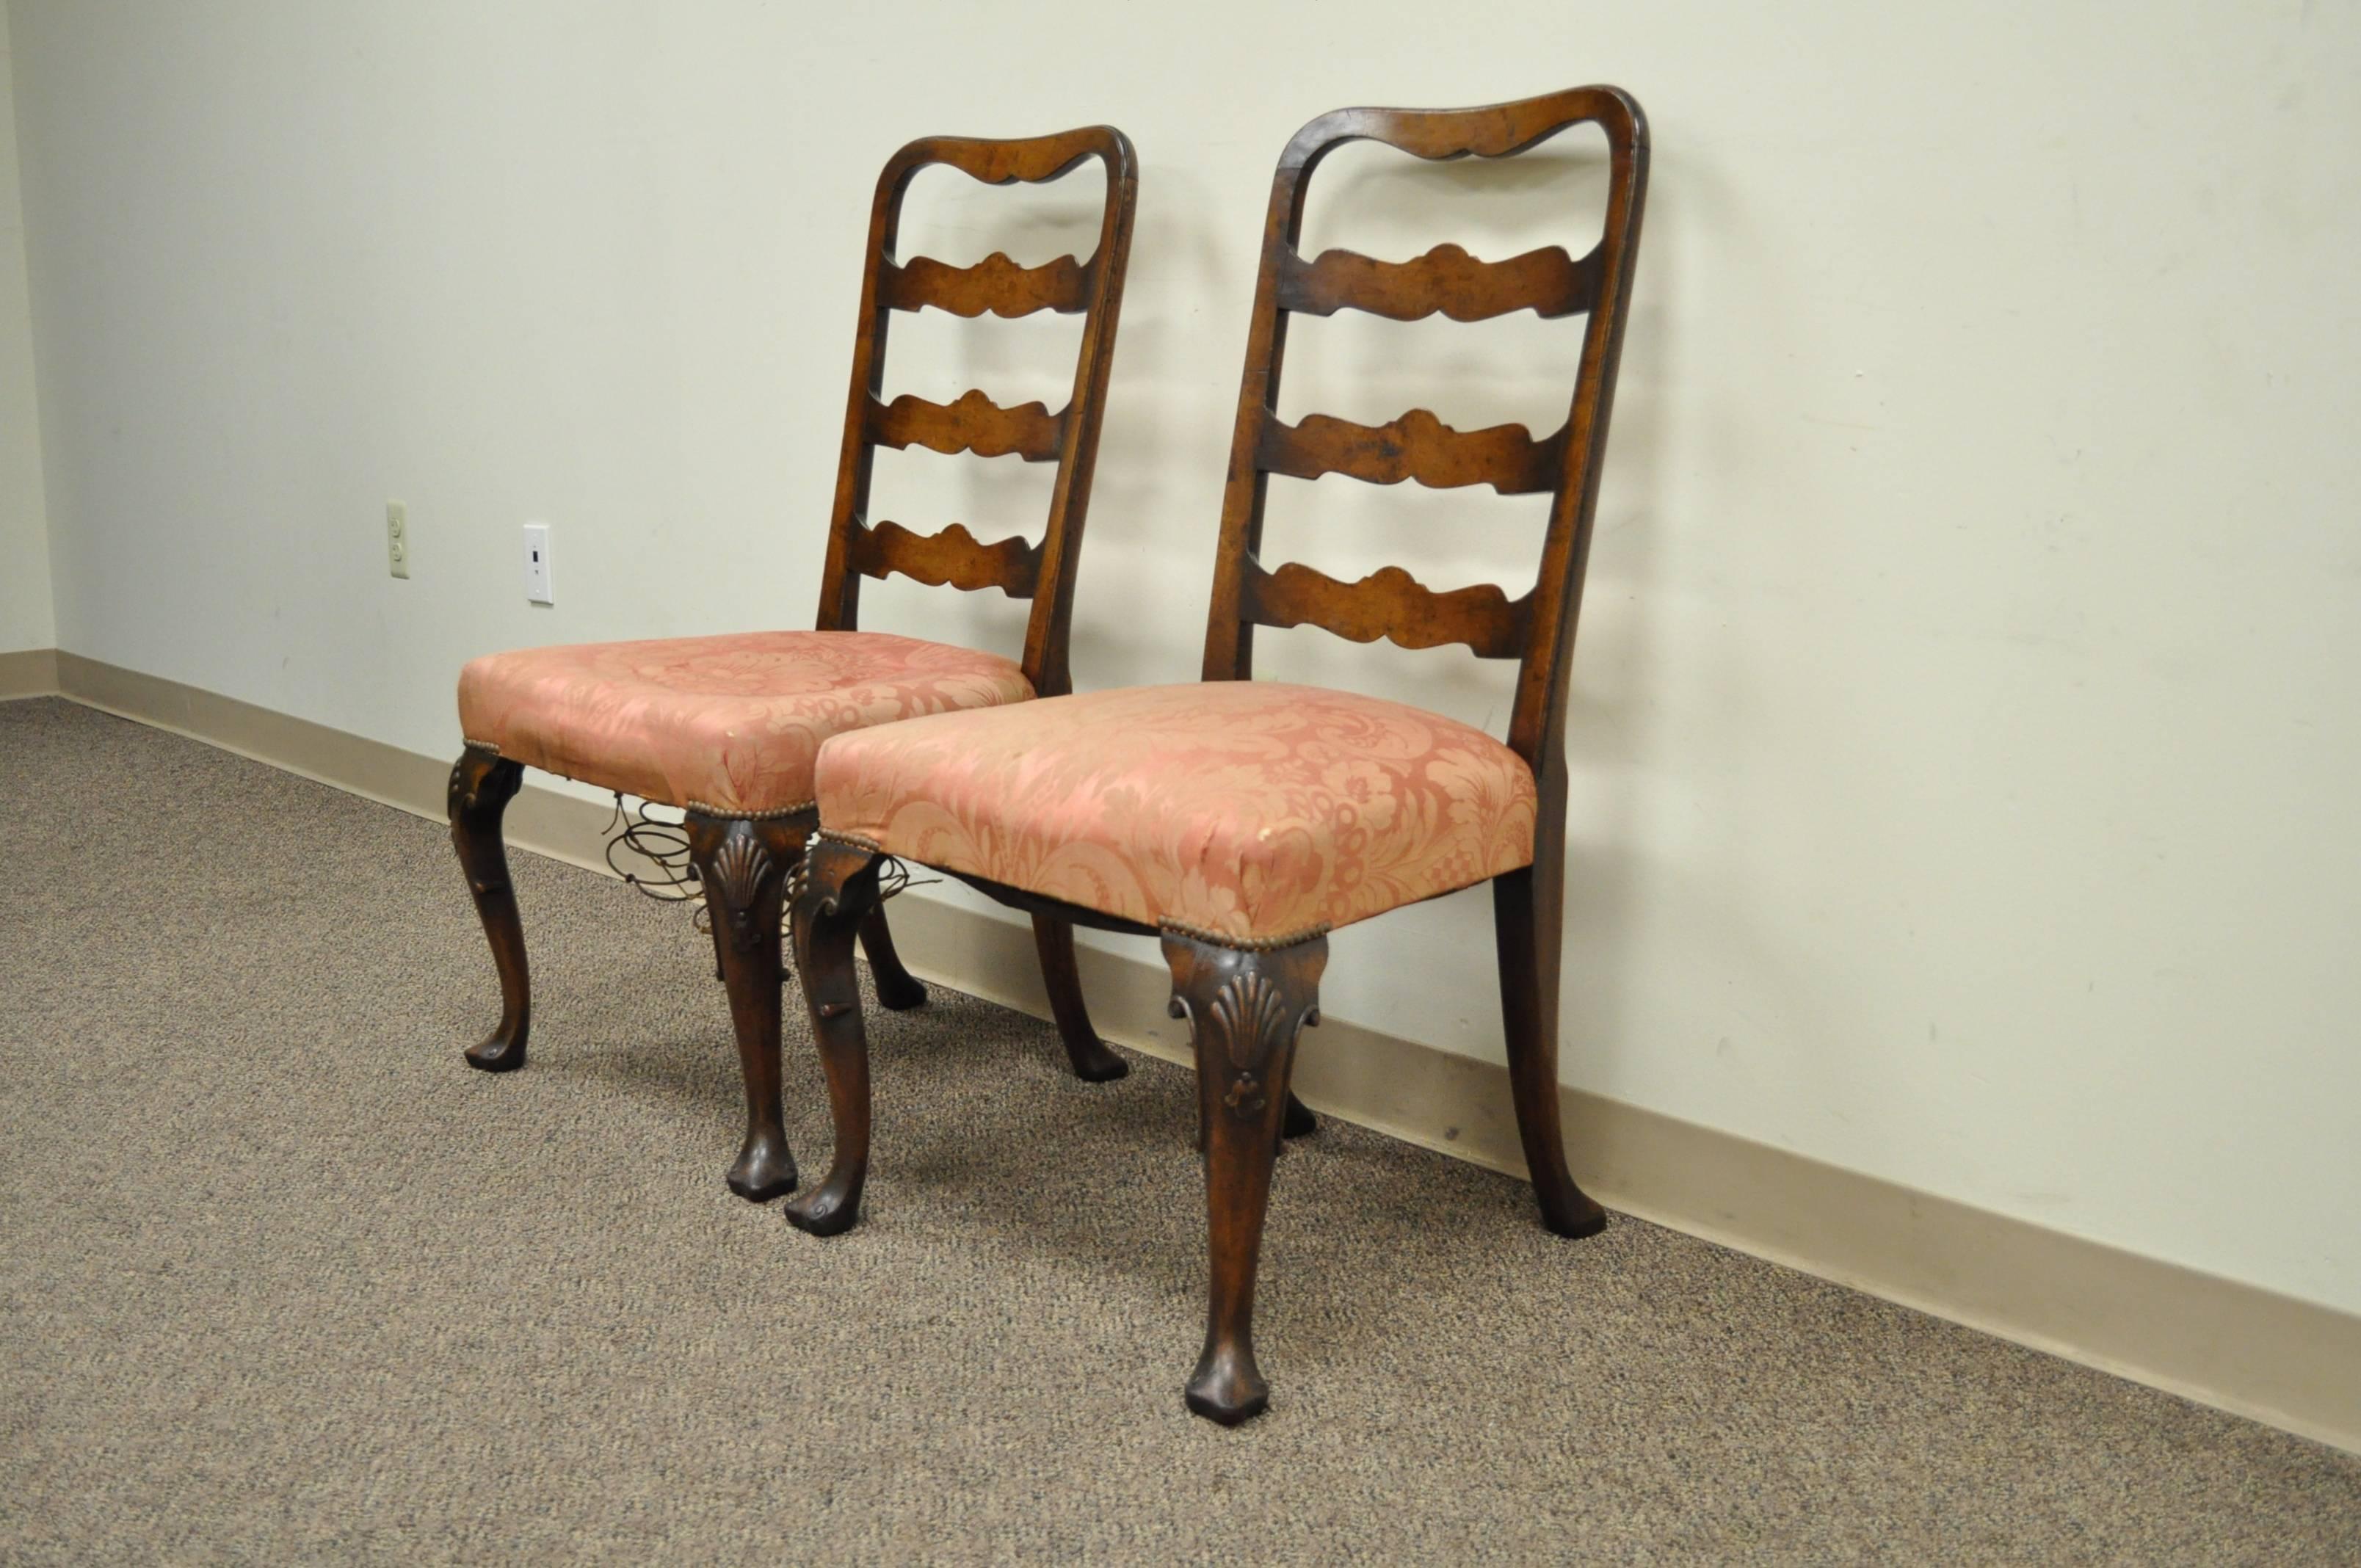 Remarkable pair of hand carved walnut, 18th Century, English Ribbon Back Side Chairs. The chairs feature hand carved and beveled edge rungs, shell carved knees, shapely cabriole legs, trifid footed, and a great overall patina to the wood. The